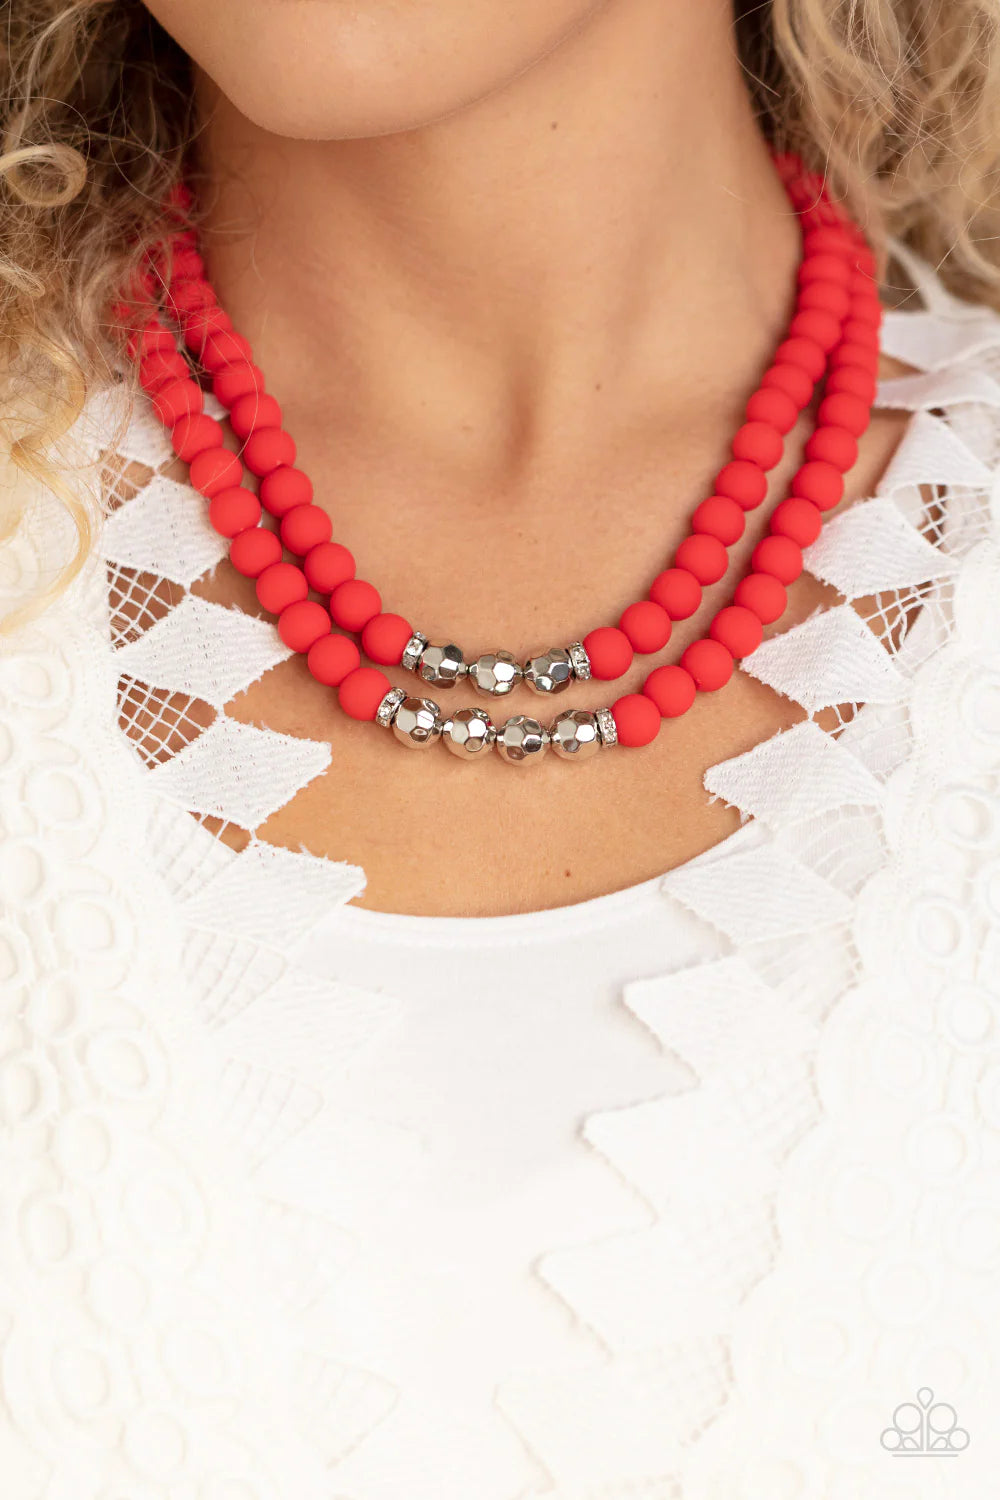 Paparazzi Accessories Summer Splash - Red Threaded along invisible wires, matte-finished Poinciana beads give way to center sections of white rhinestone encrusted rings and faceted silver beads. The vivacious display layers below the collar, creating a su